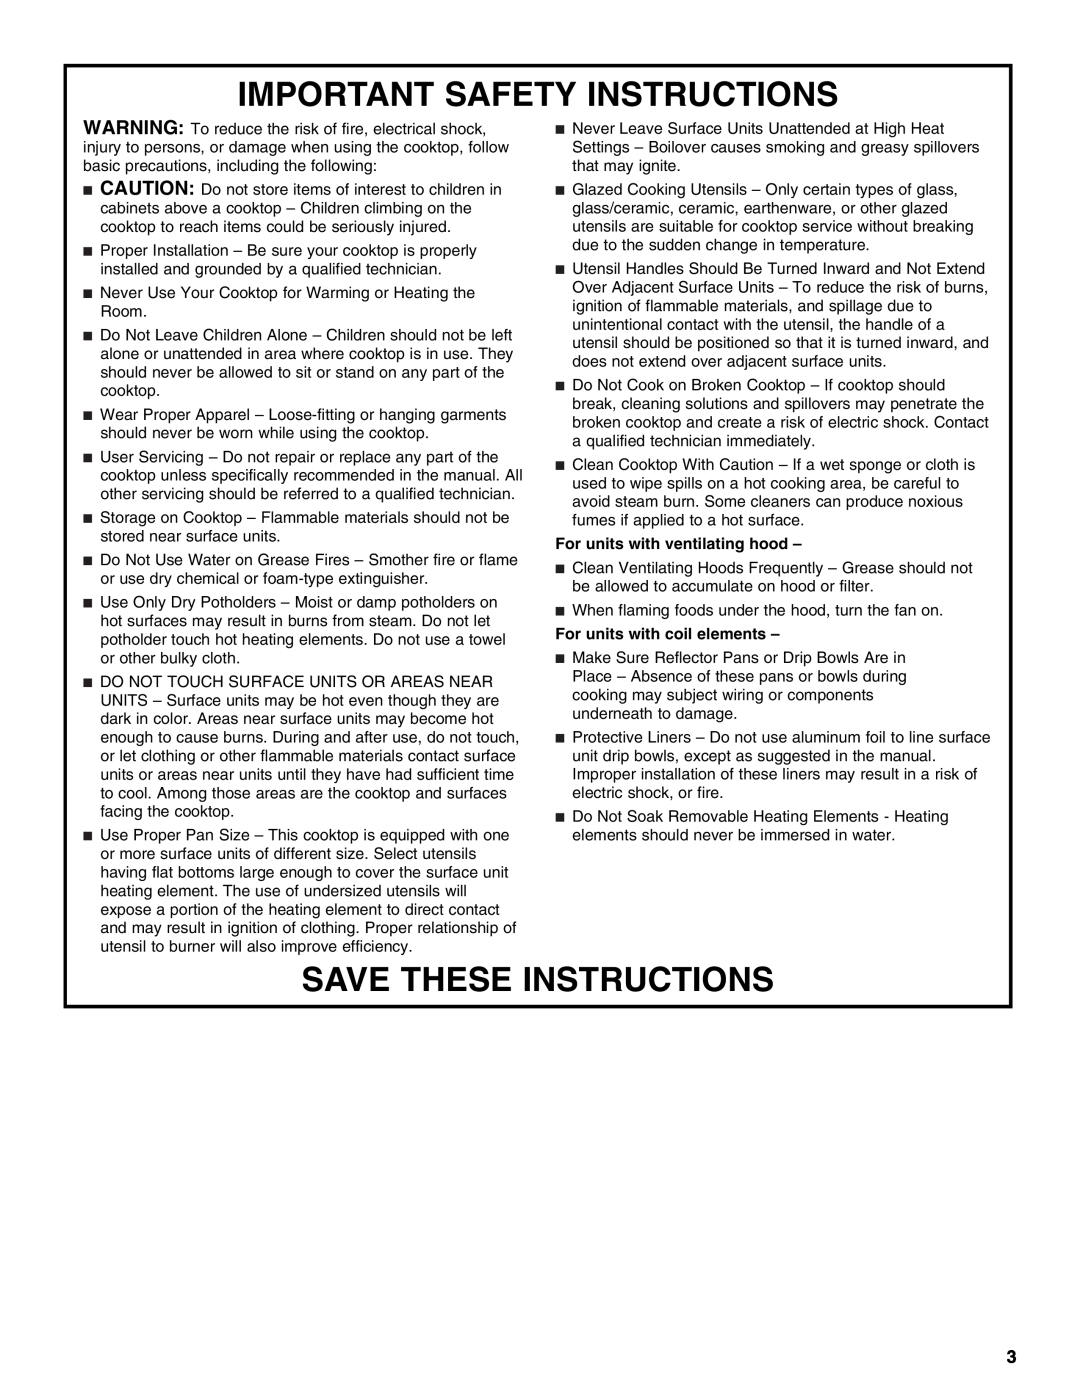 Jenn-Air 20 manual Important Safety Instructions, Save These Instructions, For units with ventilating hood 